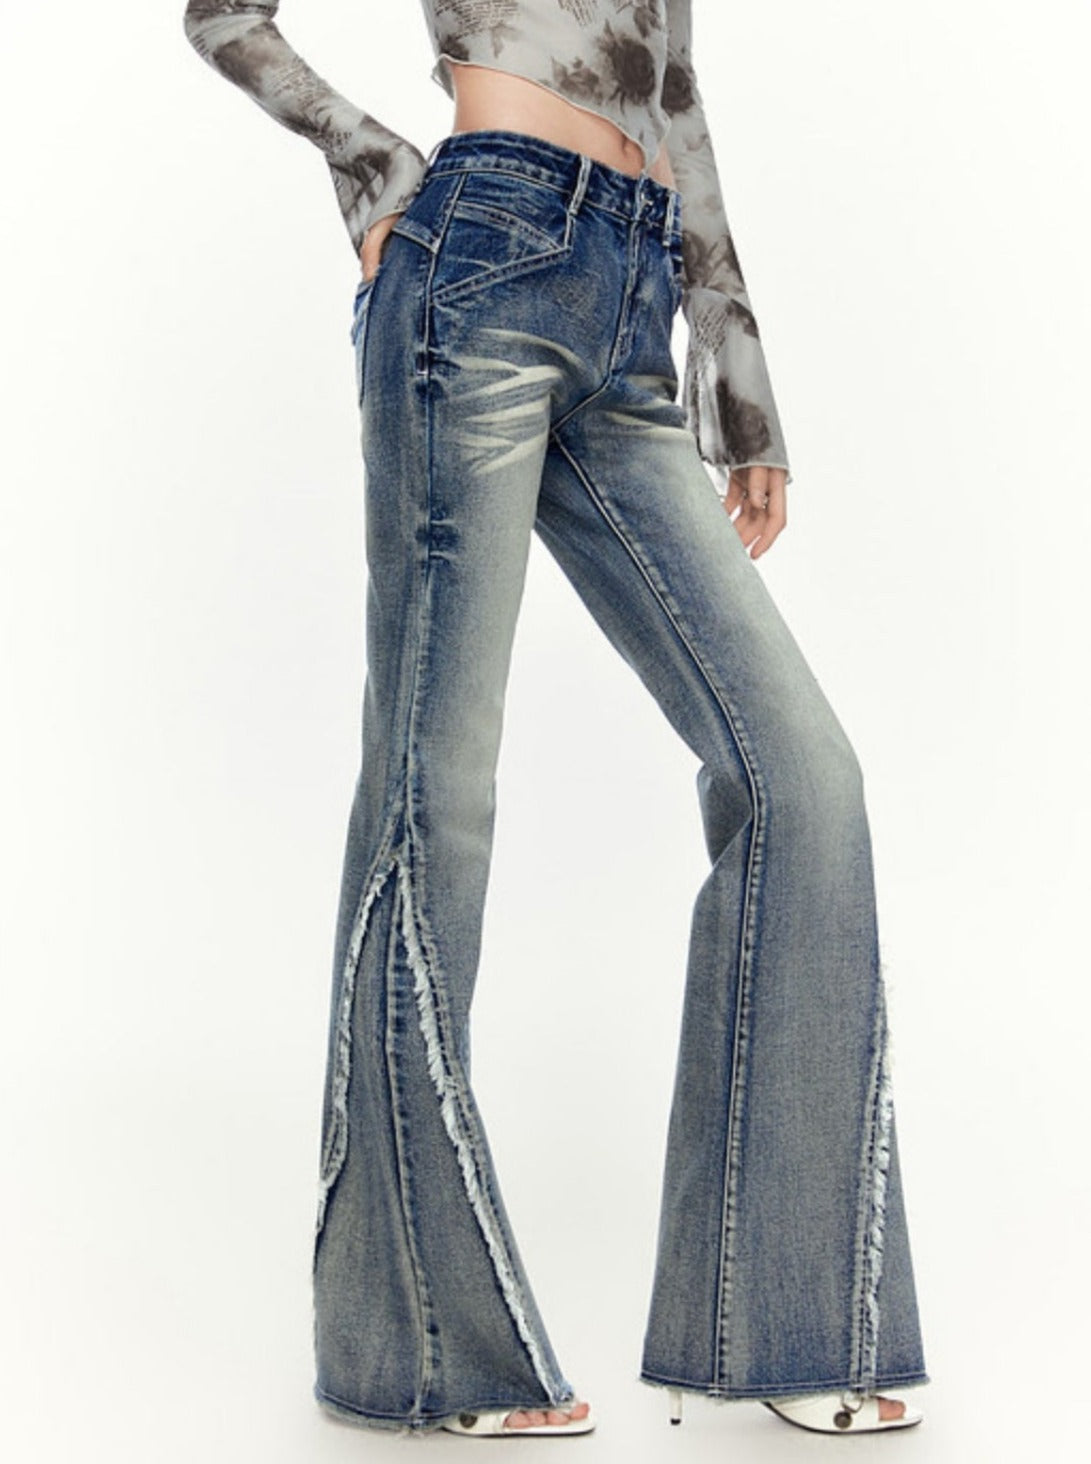 American Retro Washed Jeans Pants